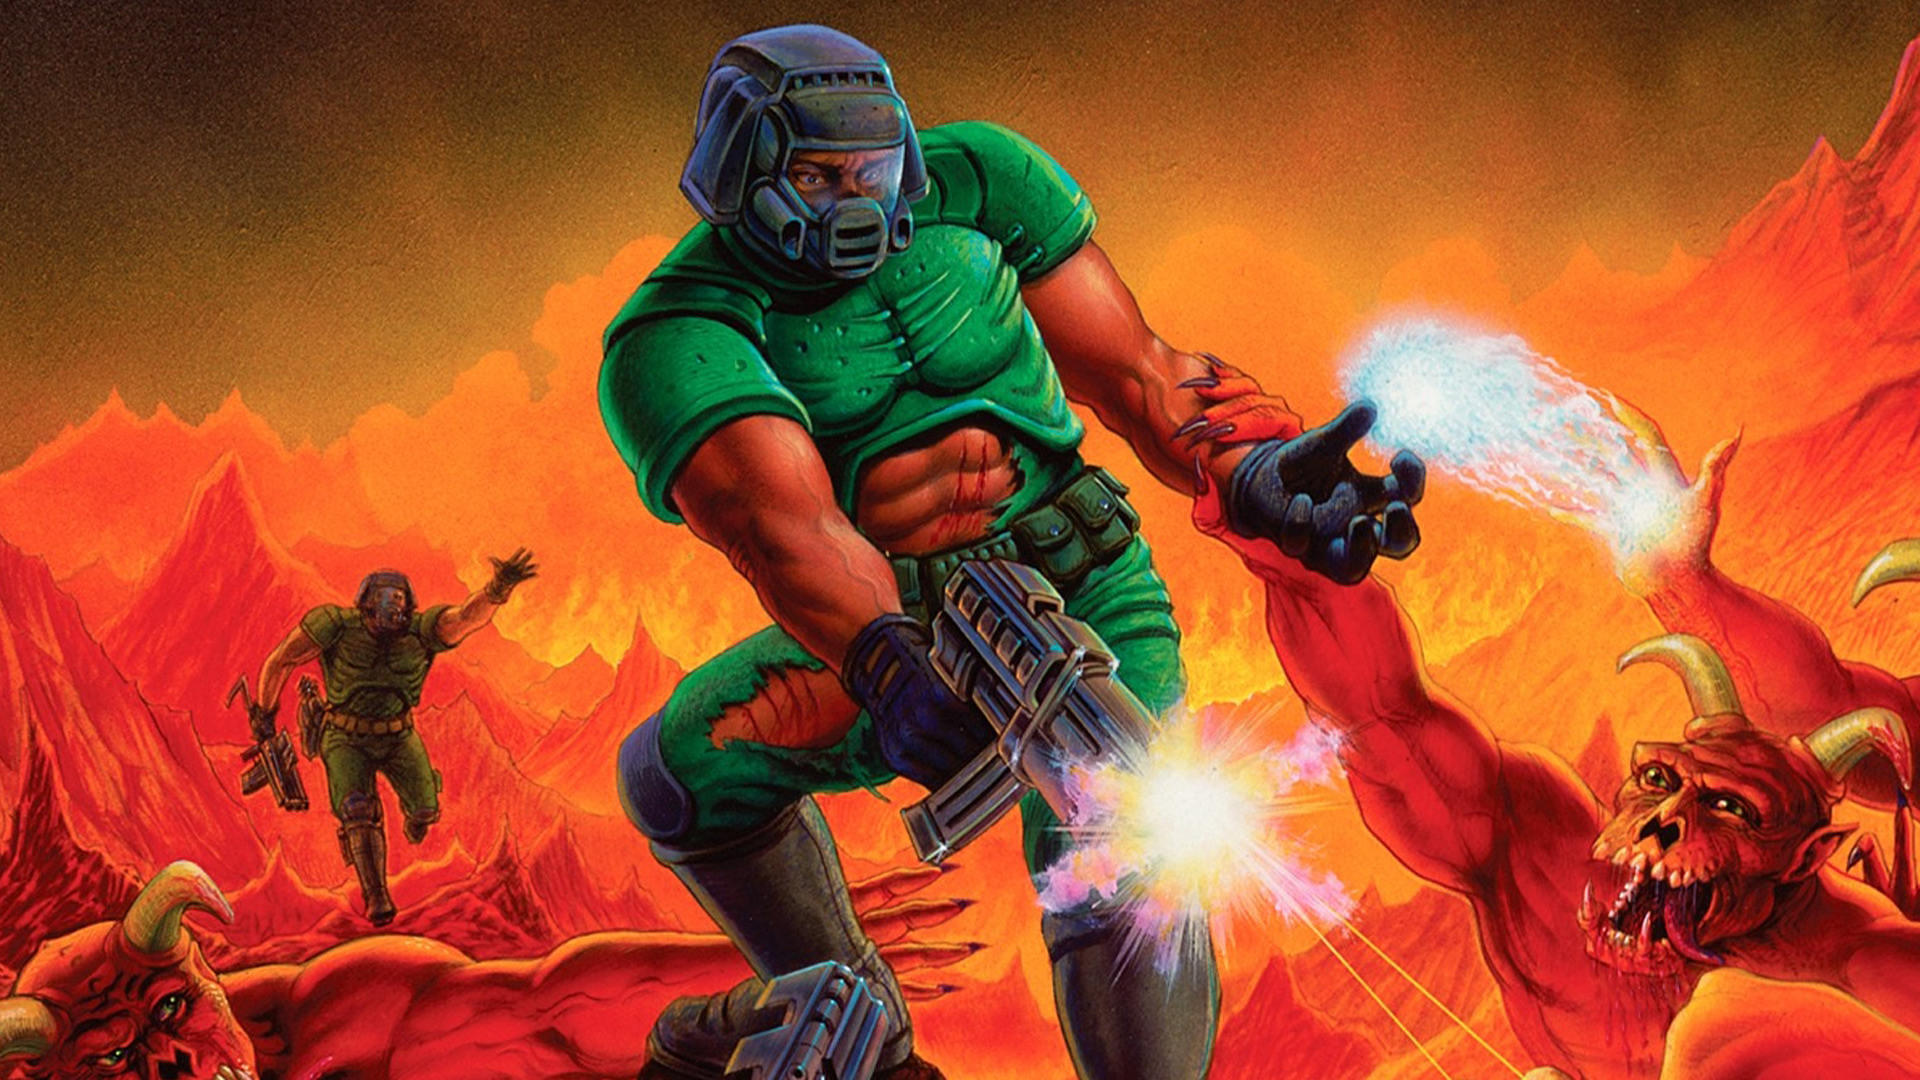 No, Doom does not take place in 2022